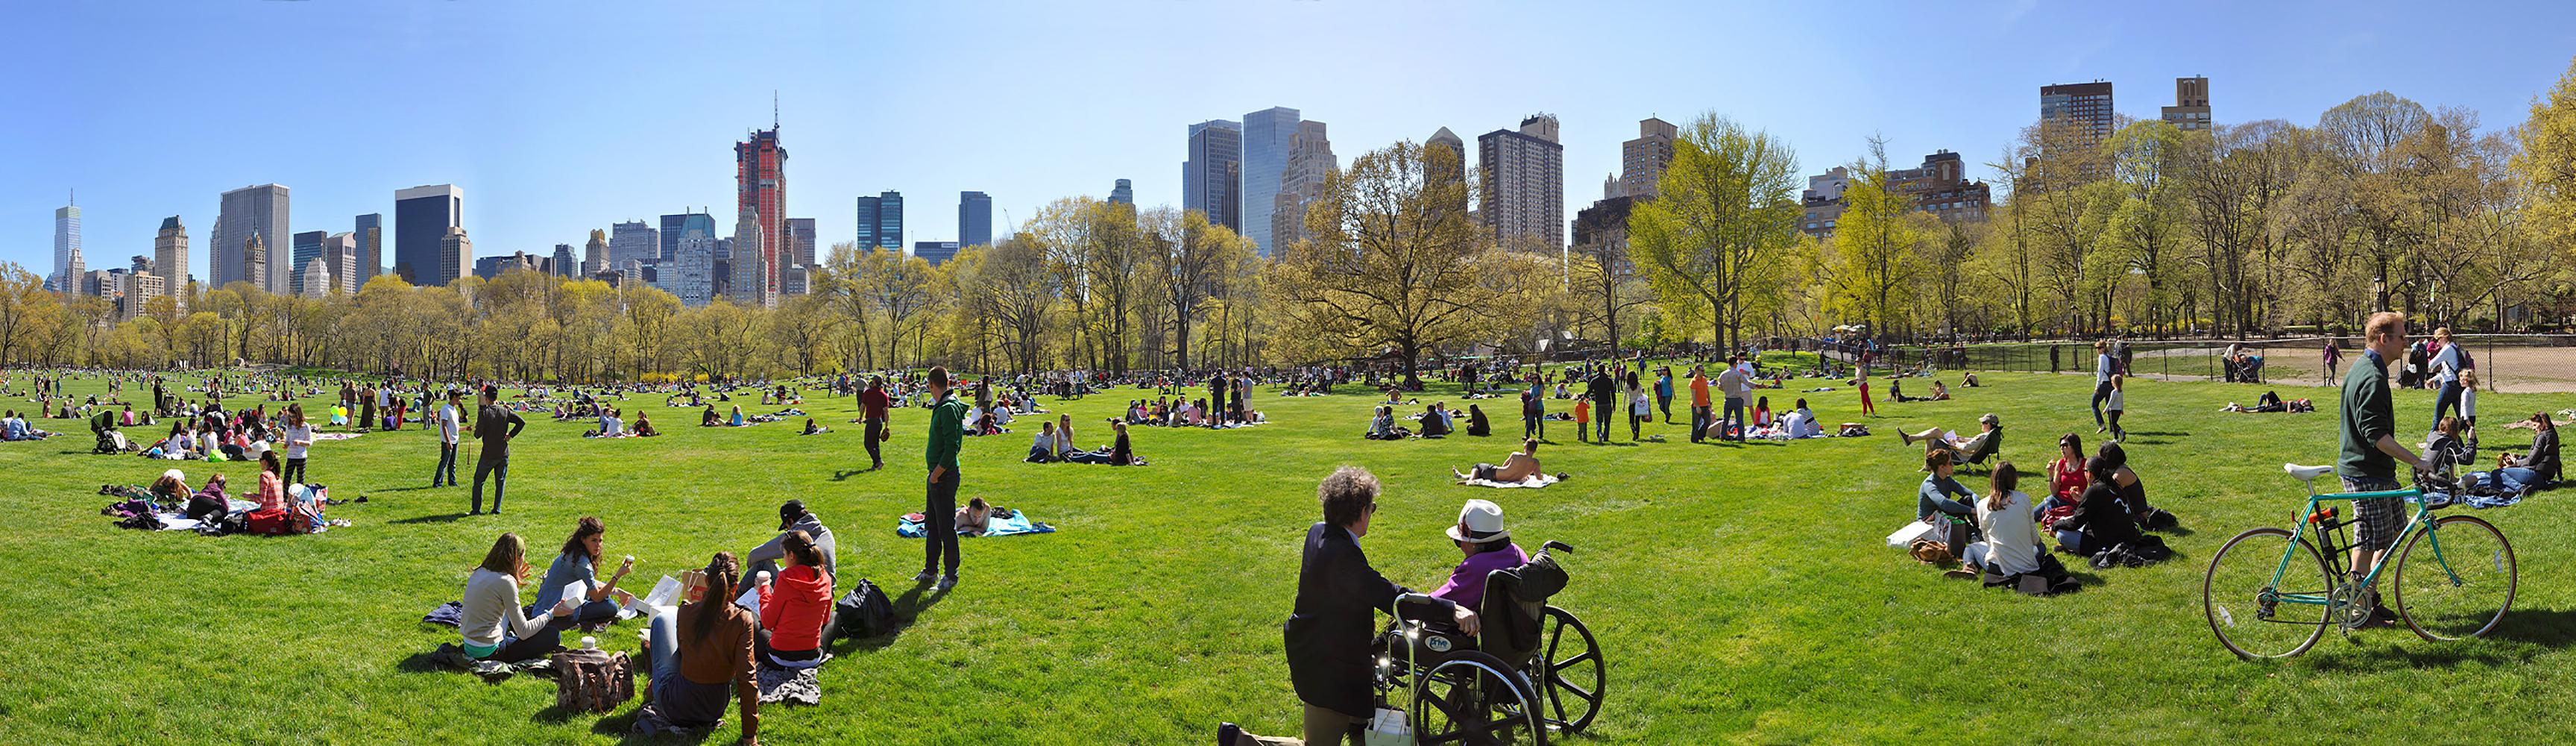 Spring afternoon in Central Parc  NYC - Contemporary Panoramic Color Photography